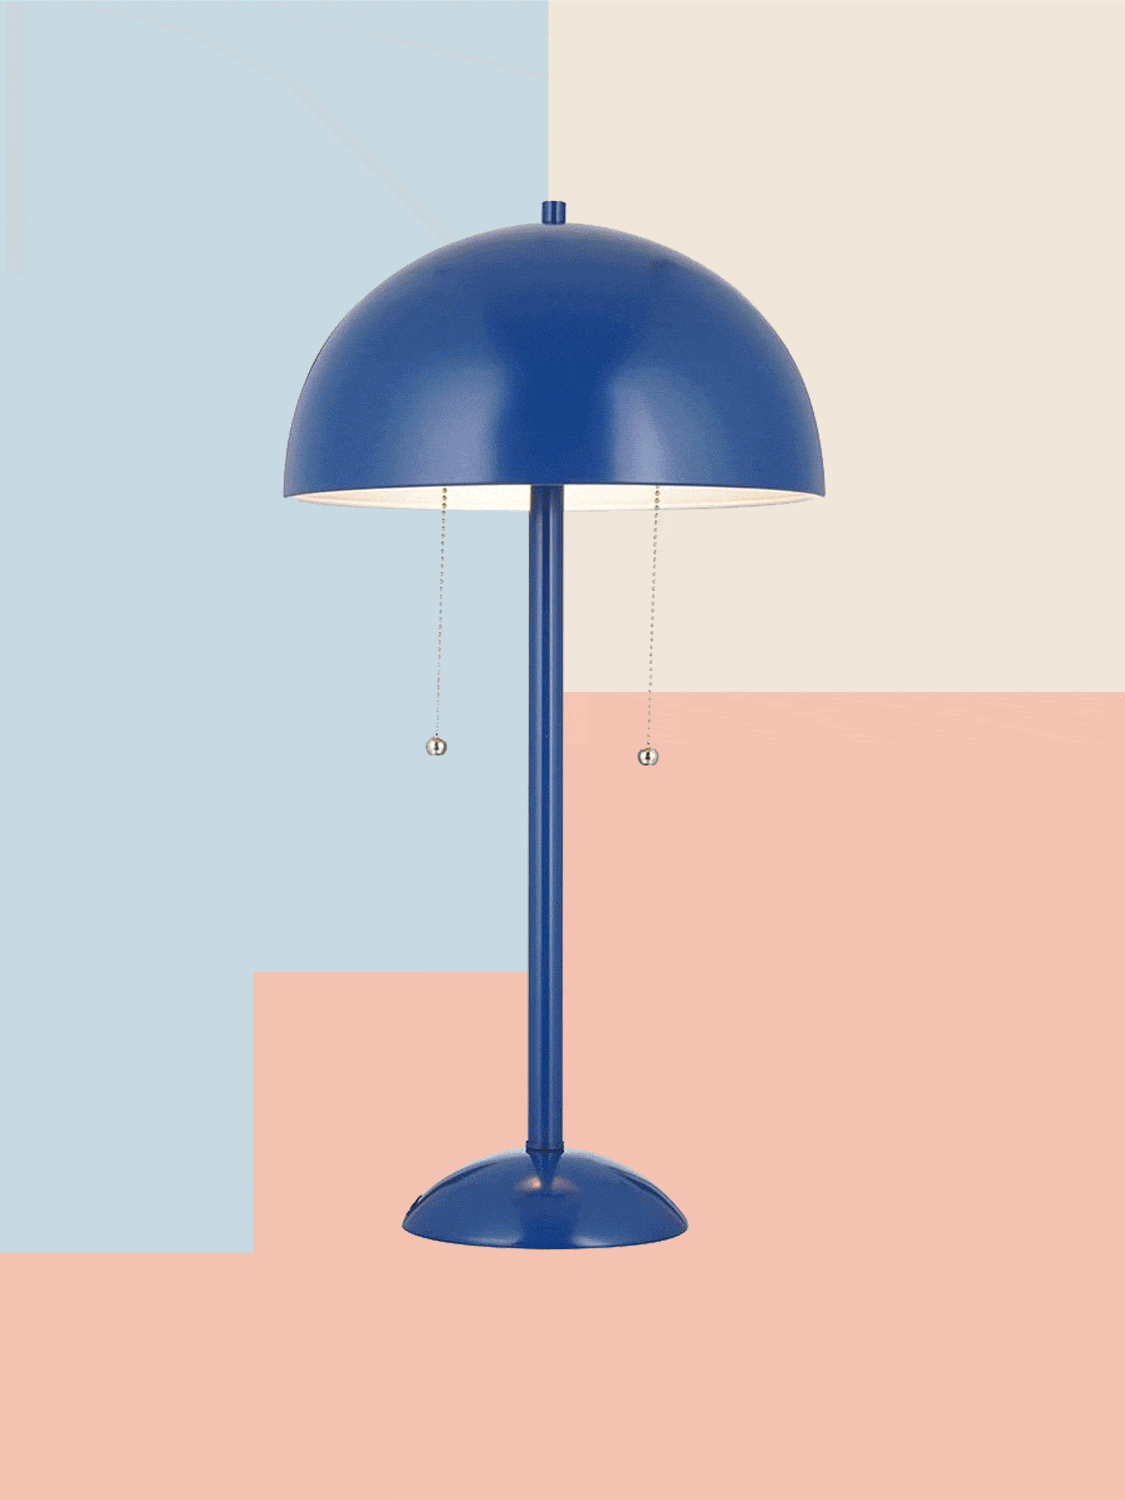 Amazon Has Secretly Been Selling the Chicest Lights